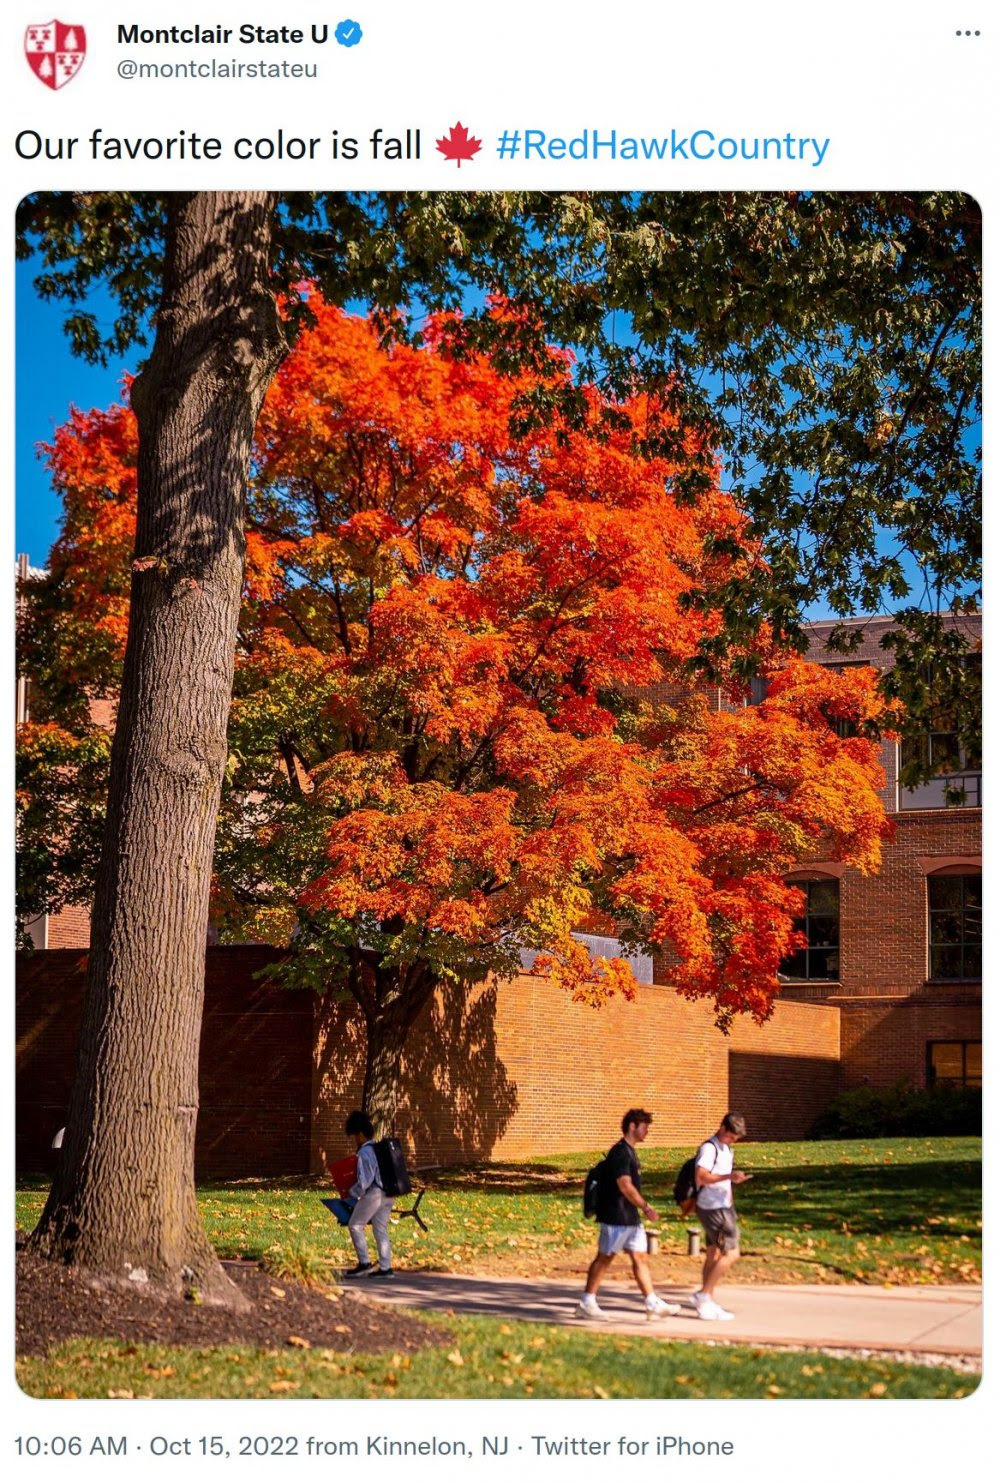 @montclairstateu: Our favorite color is fall #RedHawkCountry